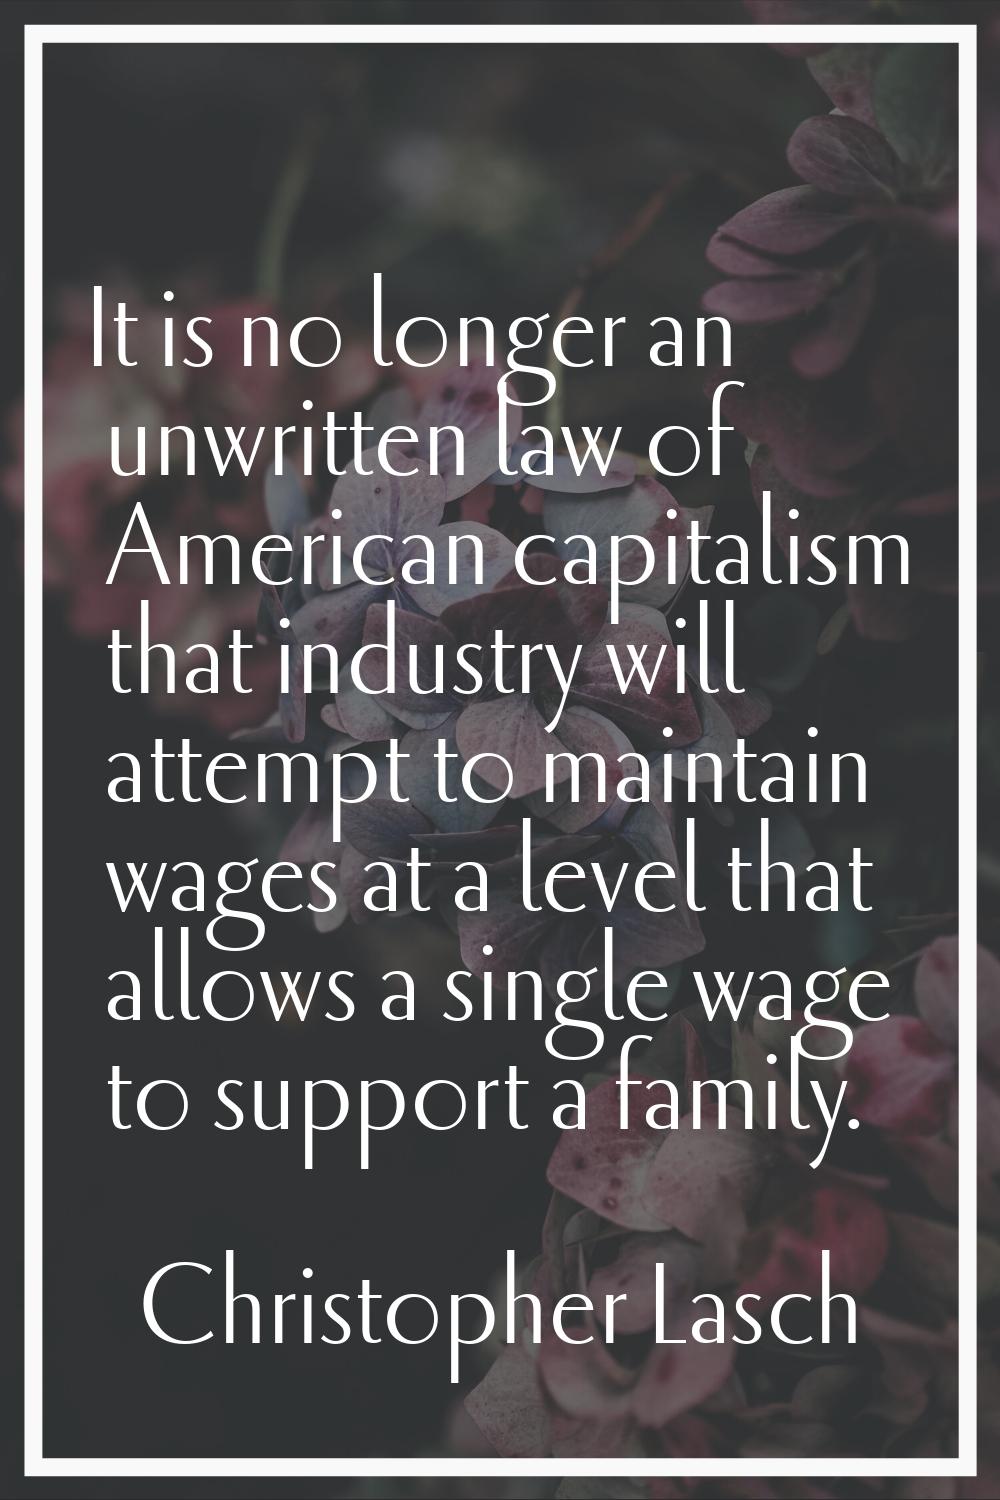 It is no longer an unwritten law of American capitalism that industry will attempt to maintain wage